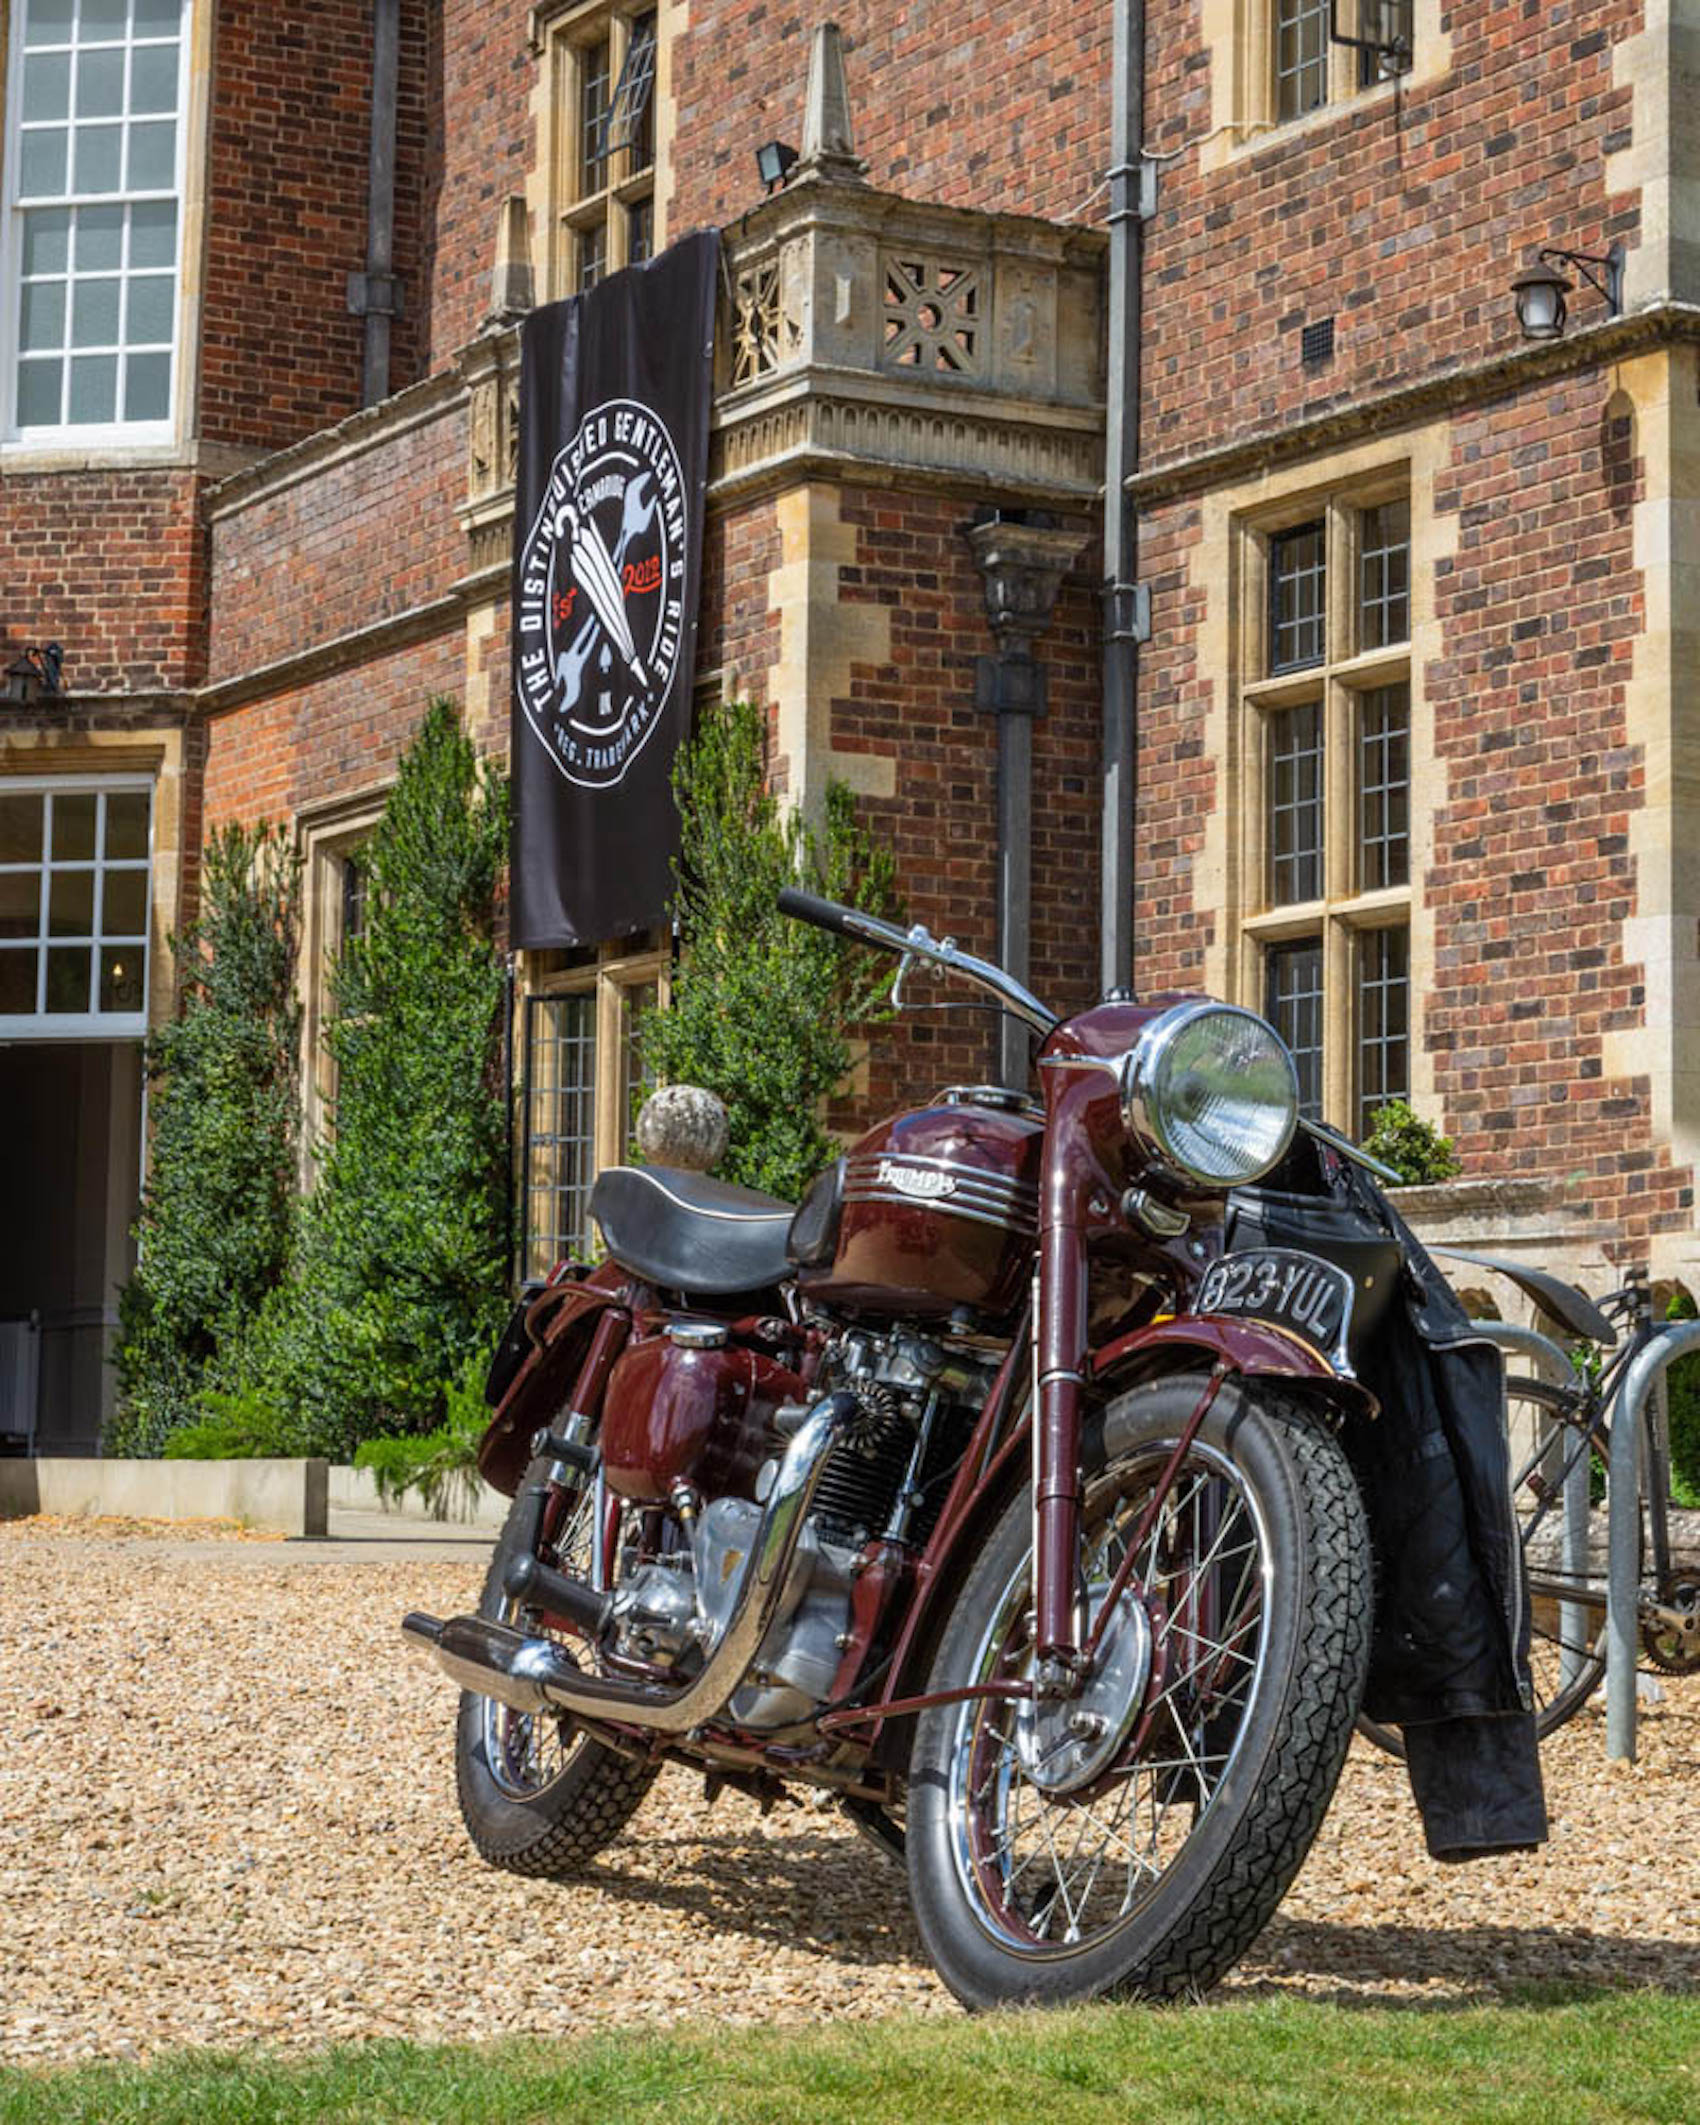 The Distinguished Gentleman's Ride - a fundraiser carried out in support of prostate cancer research and men's health. Media sourced from The Distinguished Gentleman's Ride.